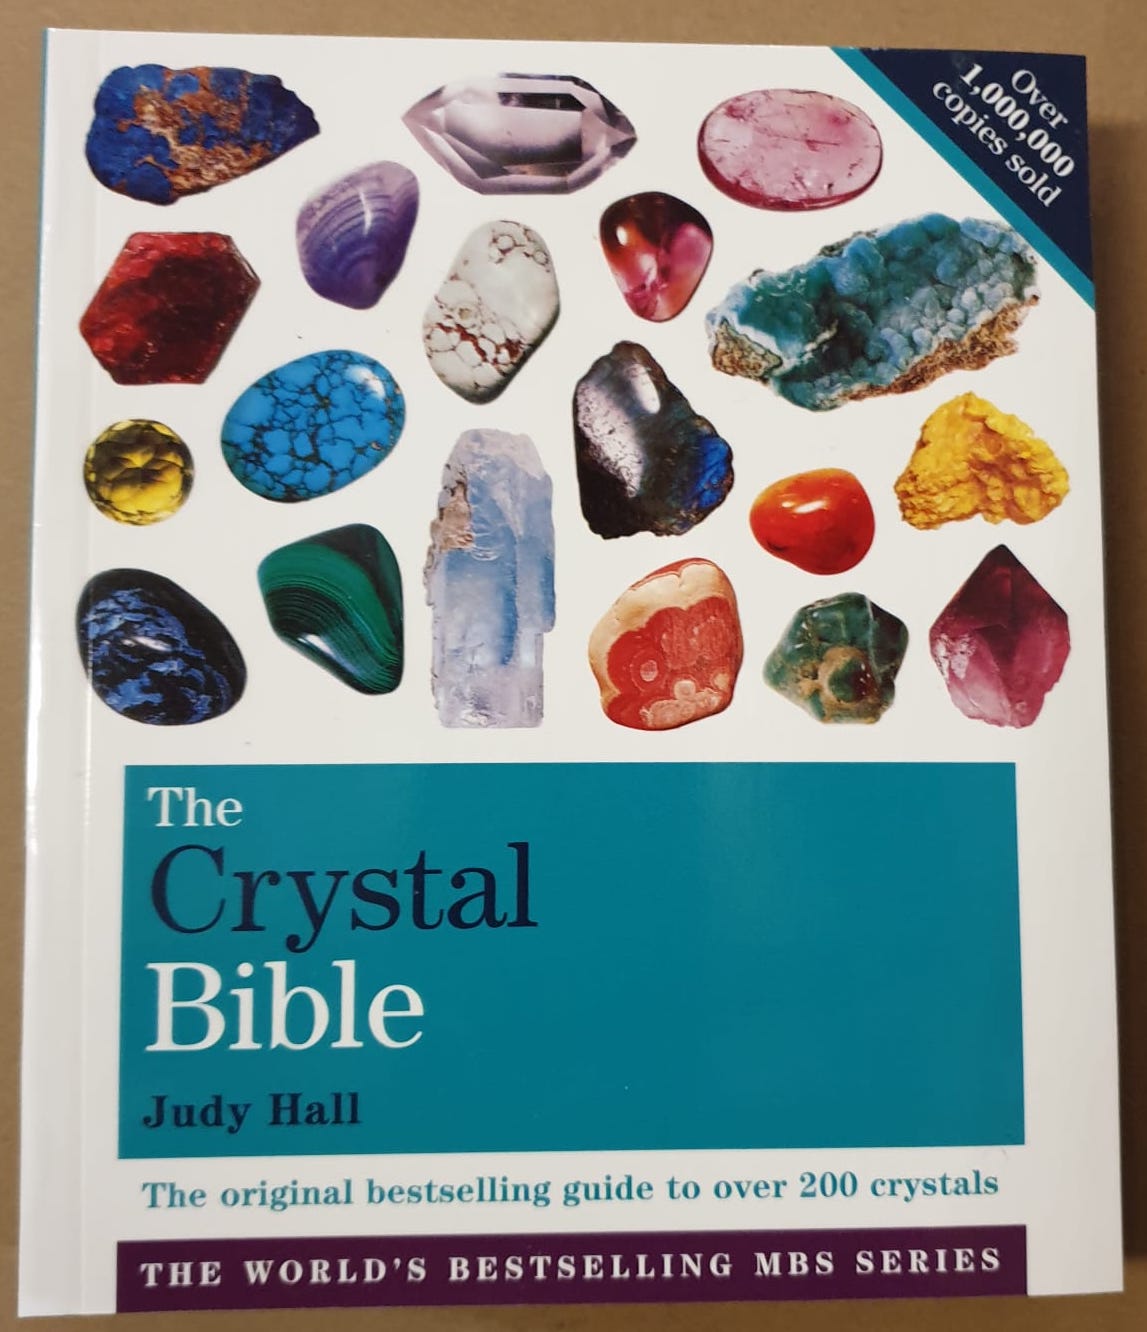 The Crystal Bible by Judy Hall - Rivendell Shop